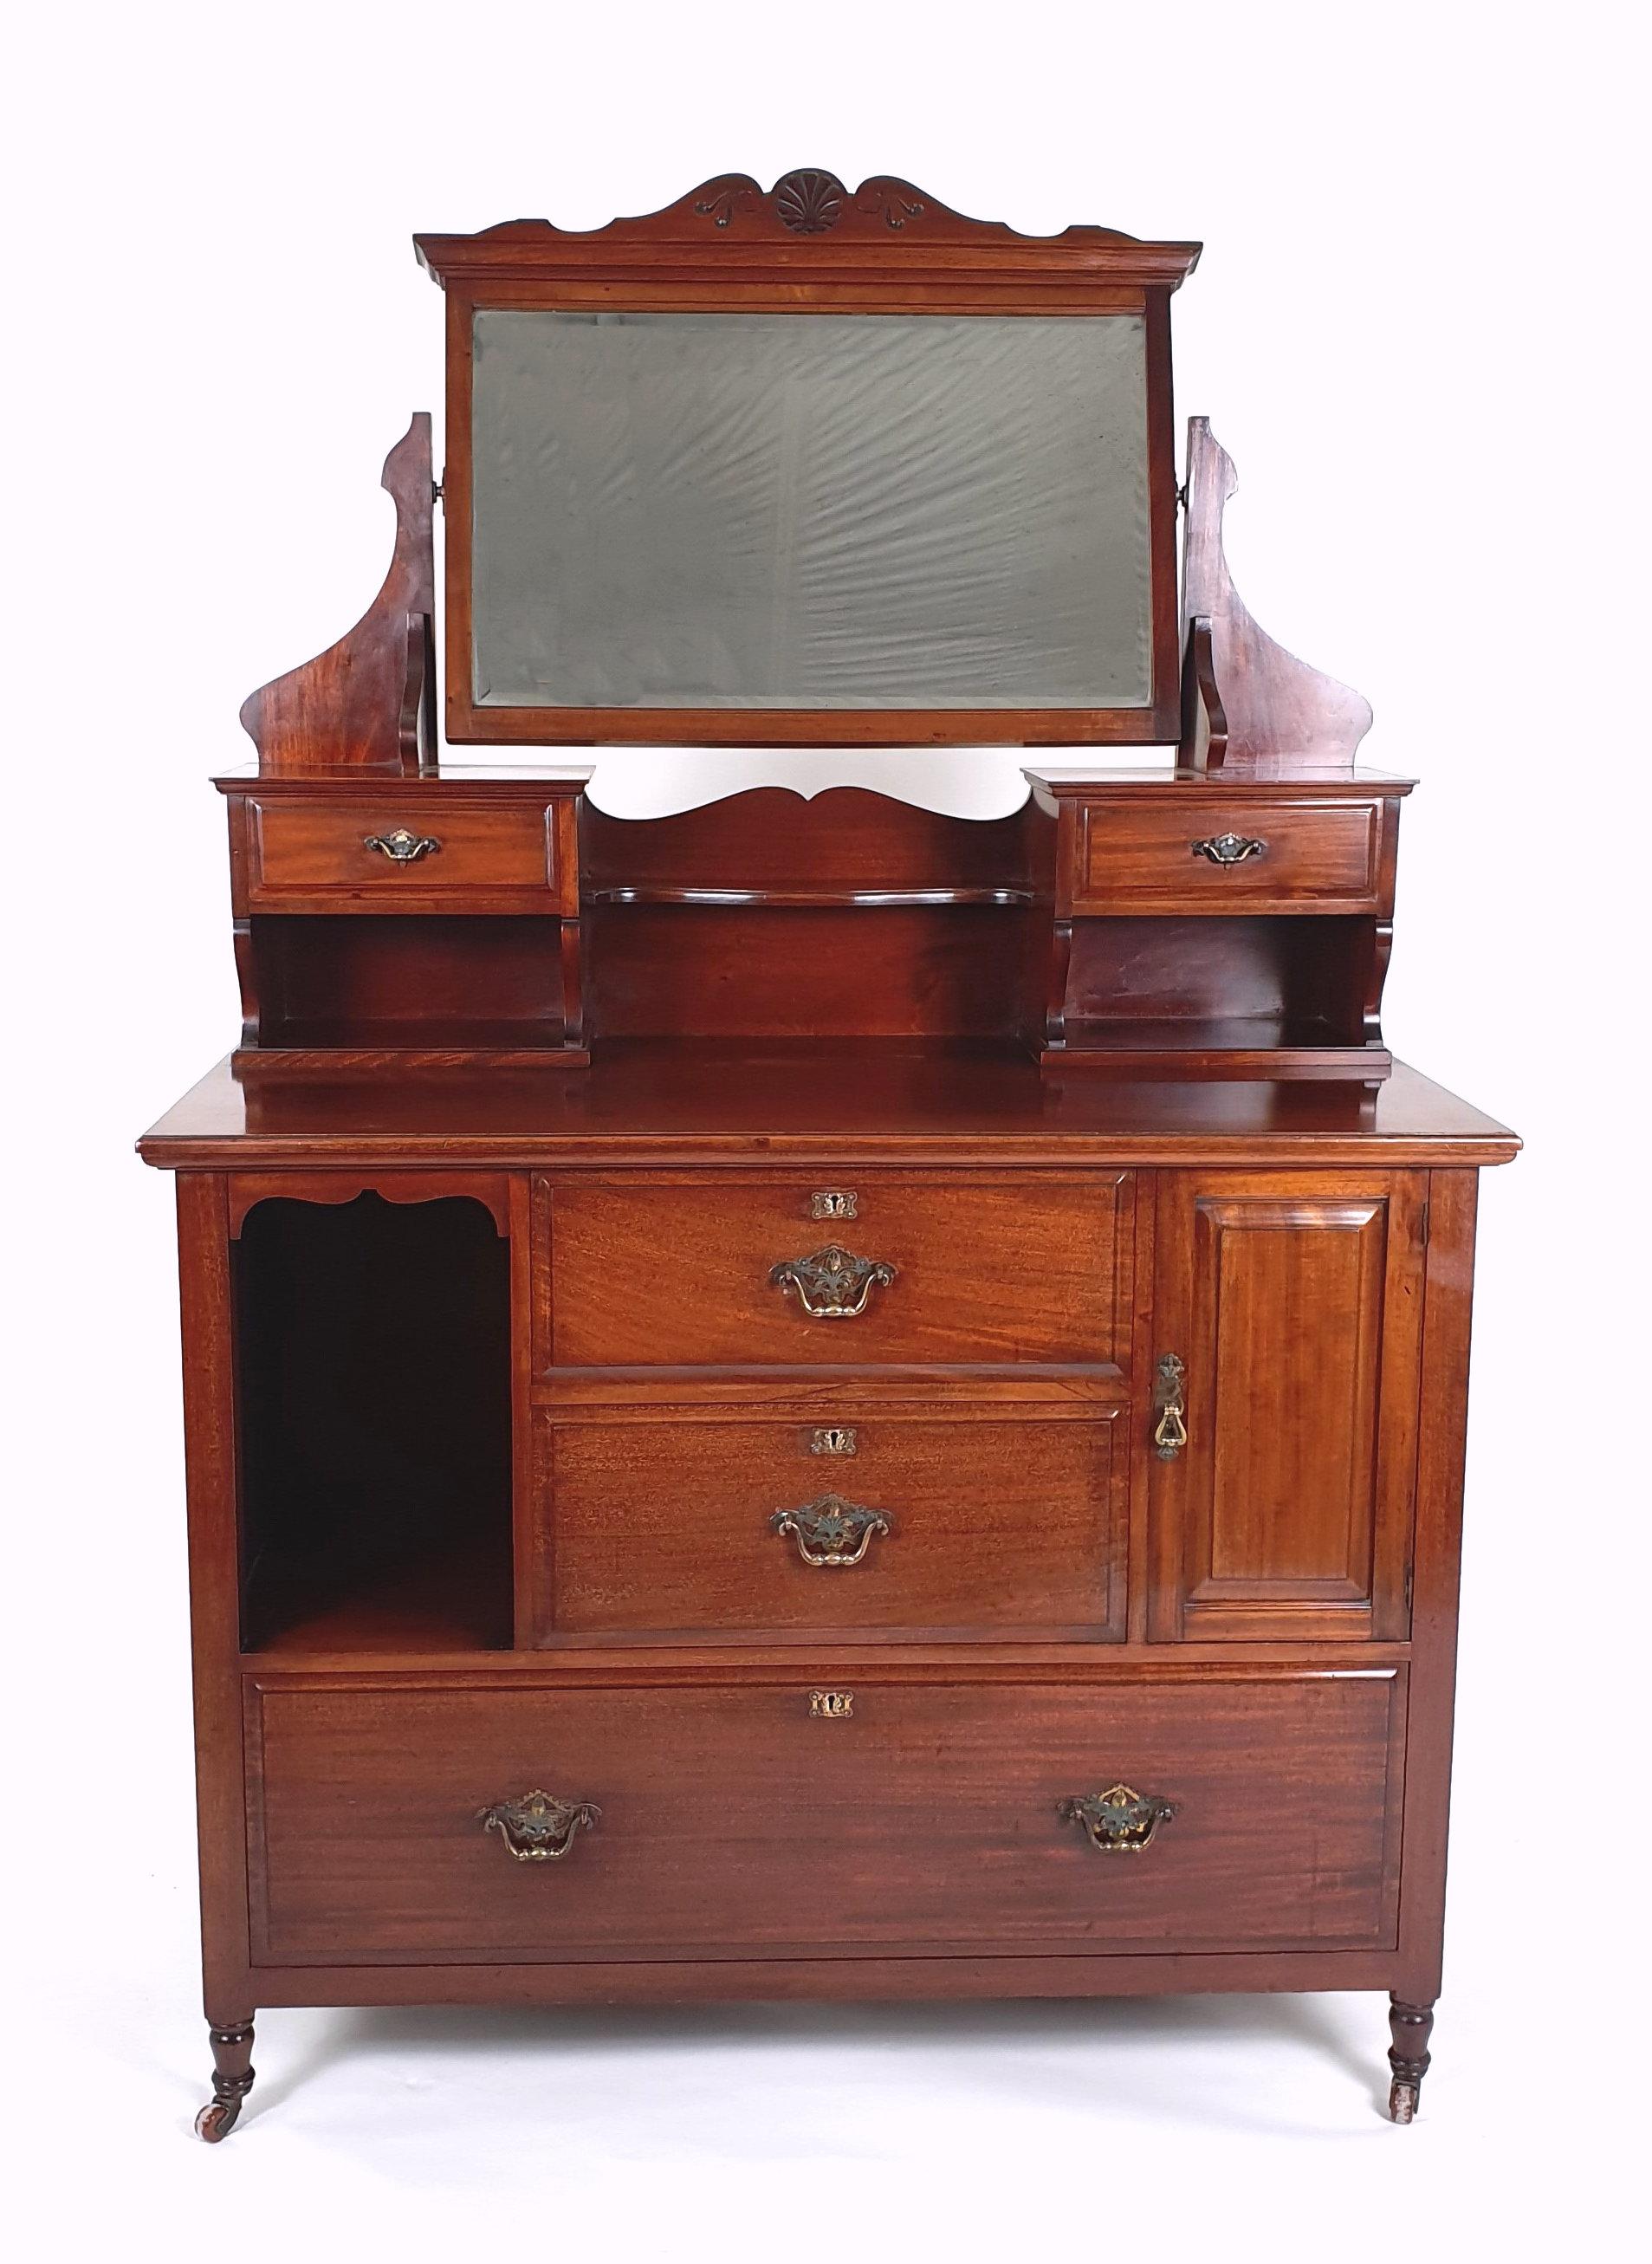 This very handsome and solid Art Deco walnut dressing chest features the original pierced brass handles and original ceramic castors. The dressing chest has an adjustable mirror on top flanked on either side by a jewellery drawer. There are 2 short